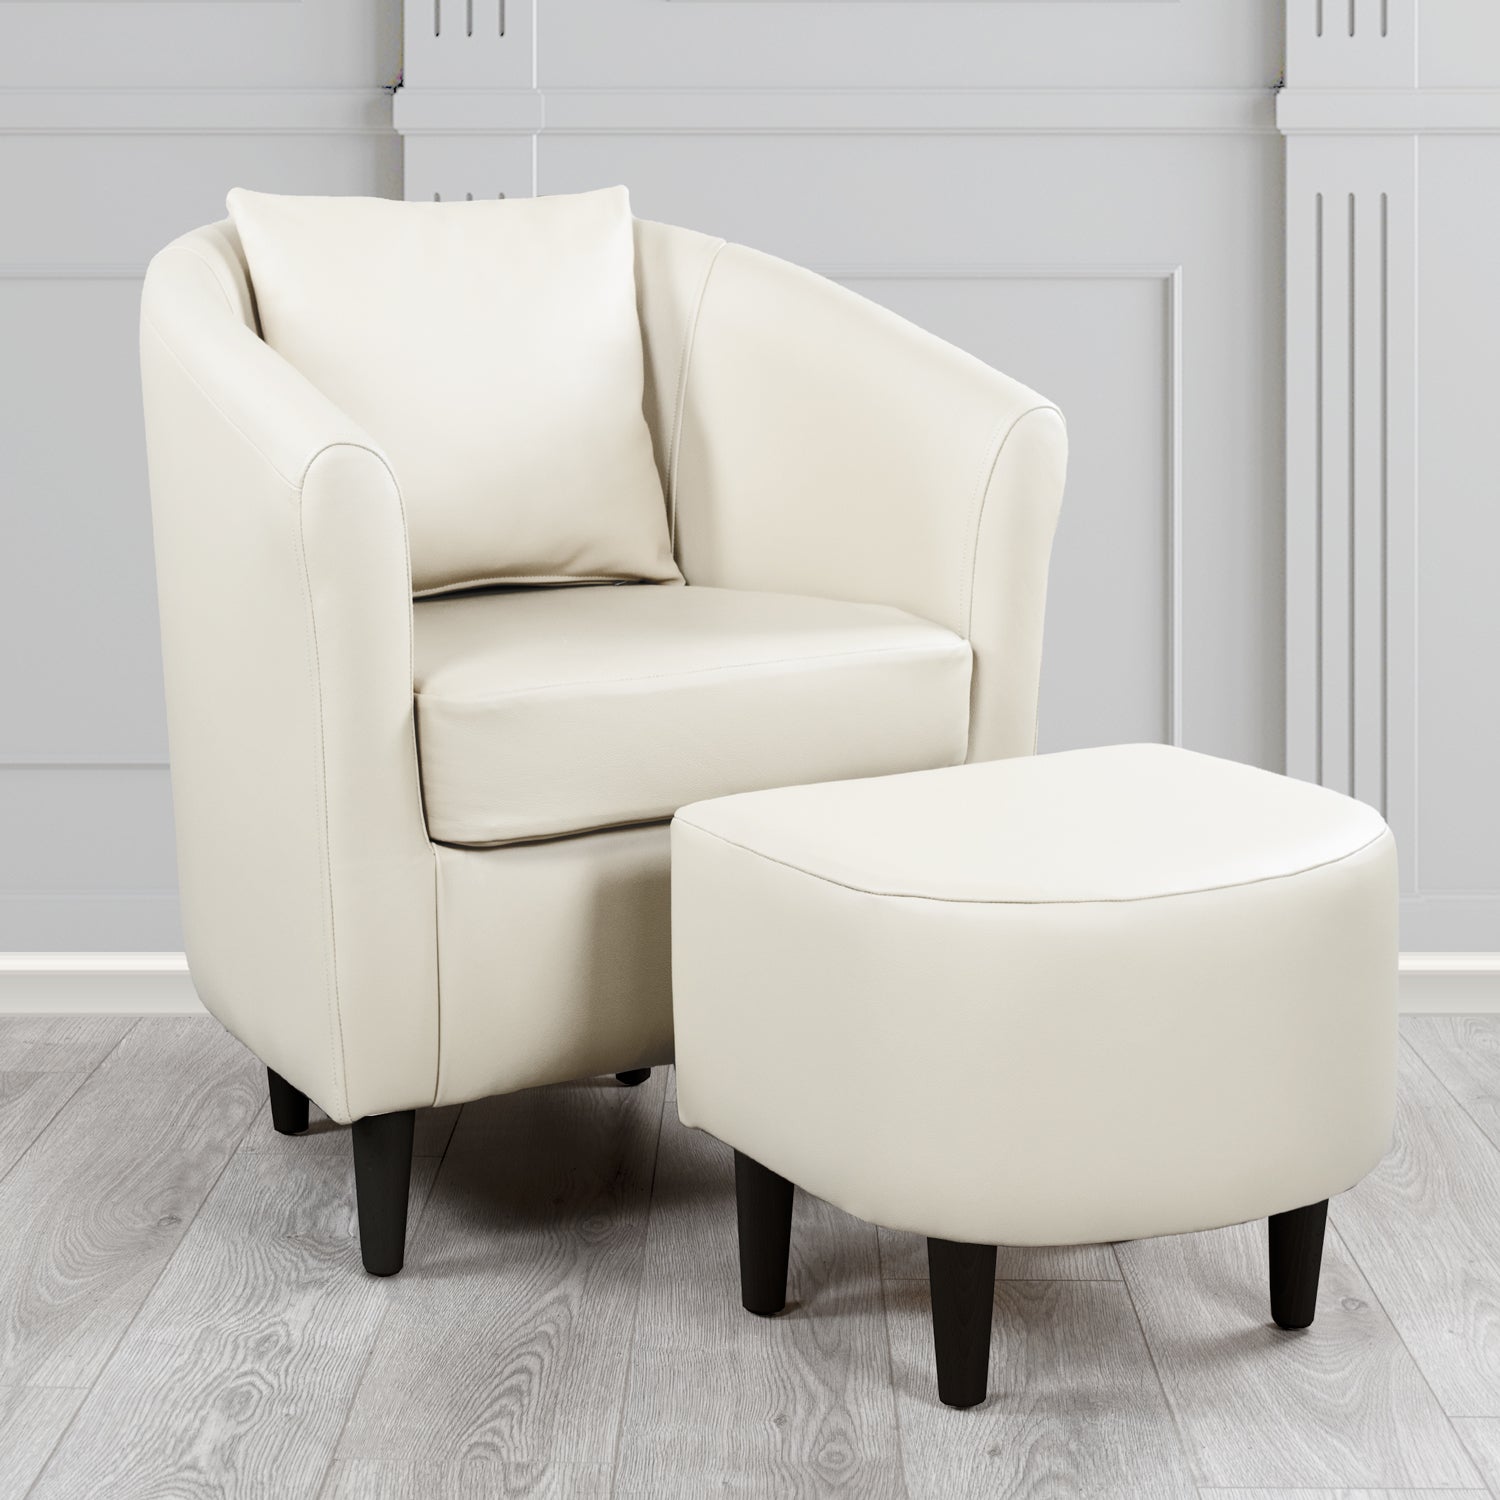 St Tropez Shelly White Crib 5 Genuine Leather Tub Chair & Footstool Set With Scatter Cushion (6619545862186)